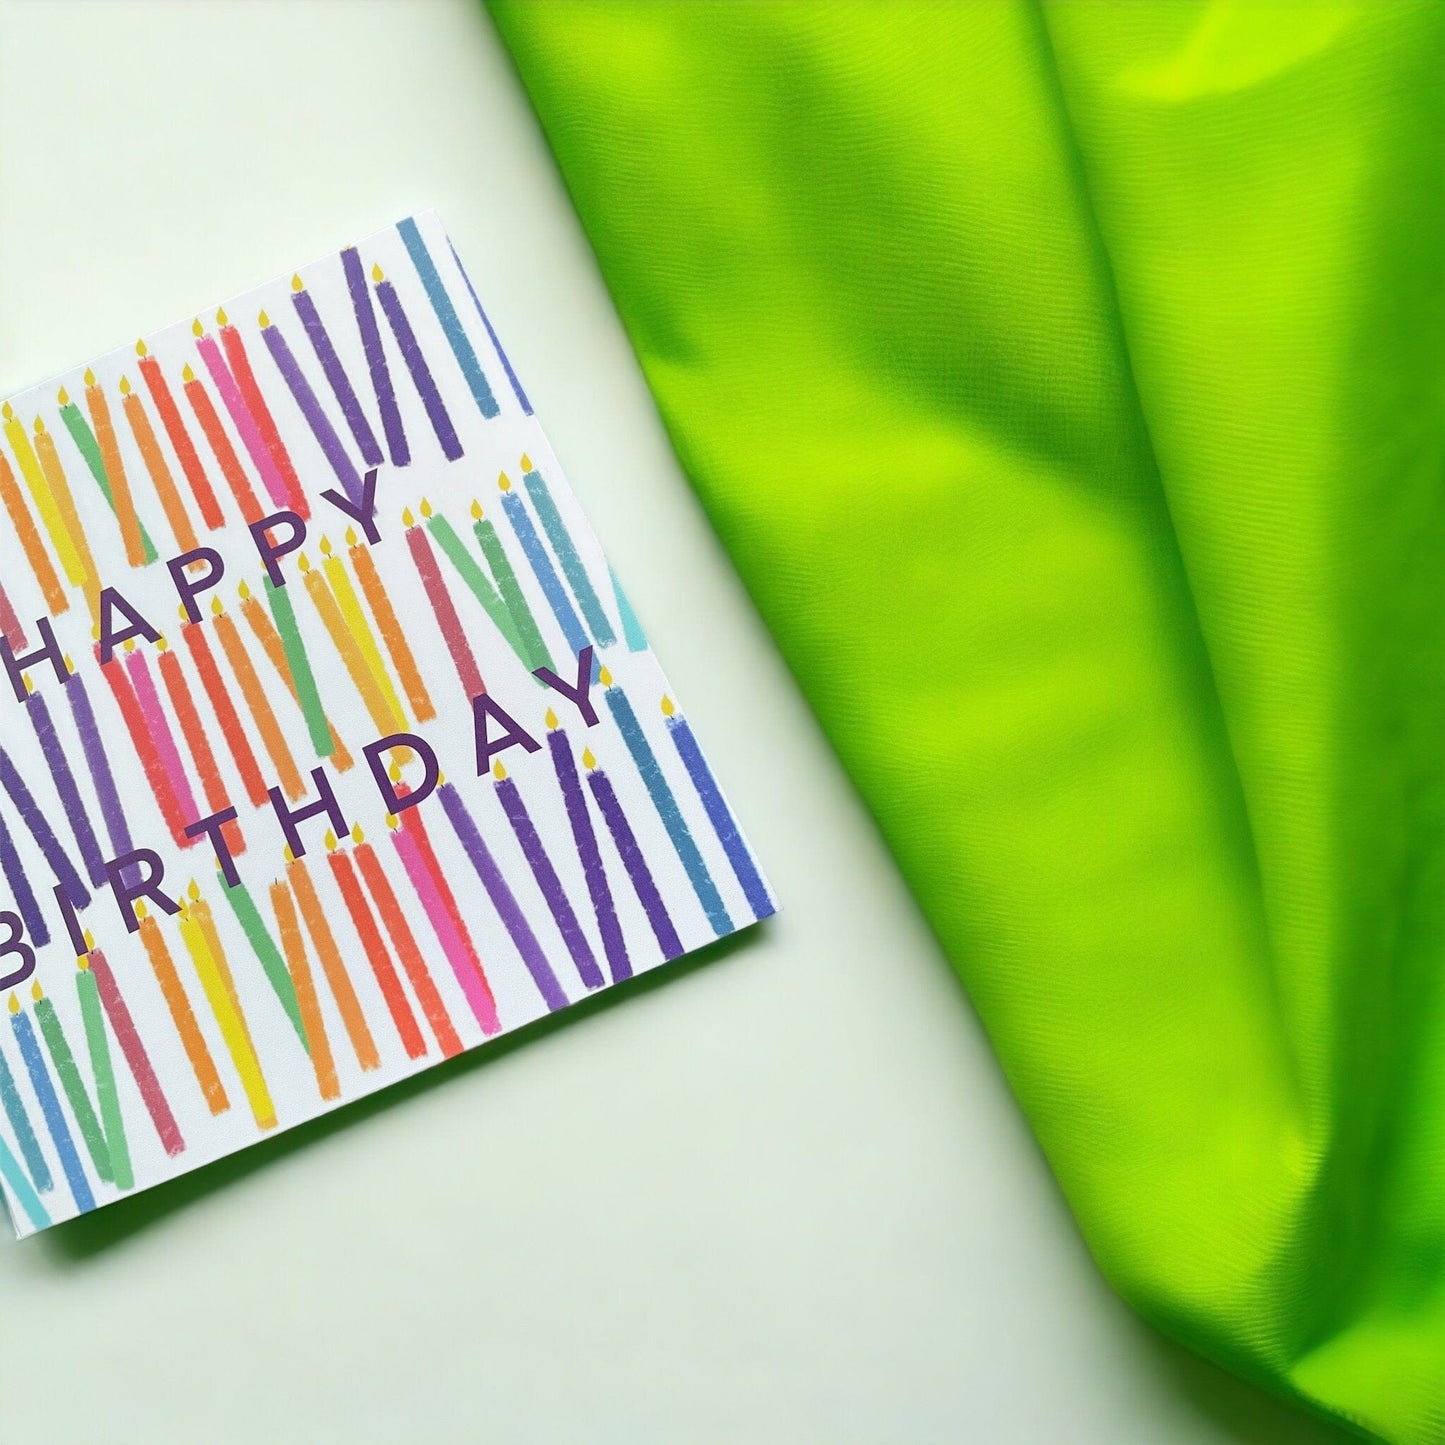 Happy birthday rainbow candles card And Hope Designs Cards